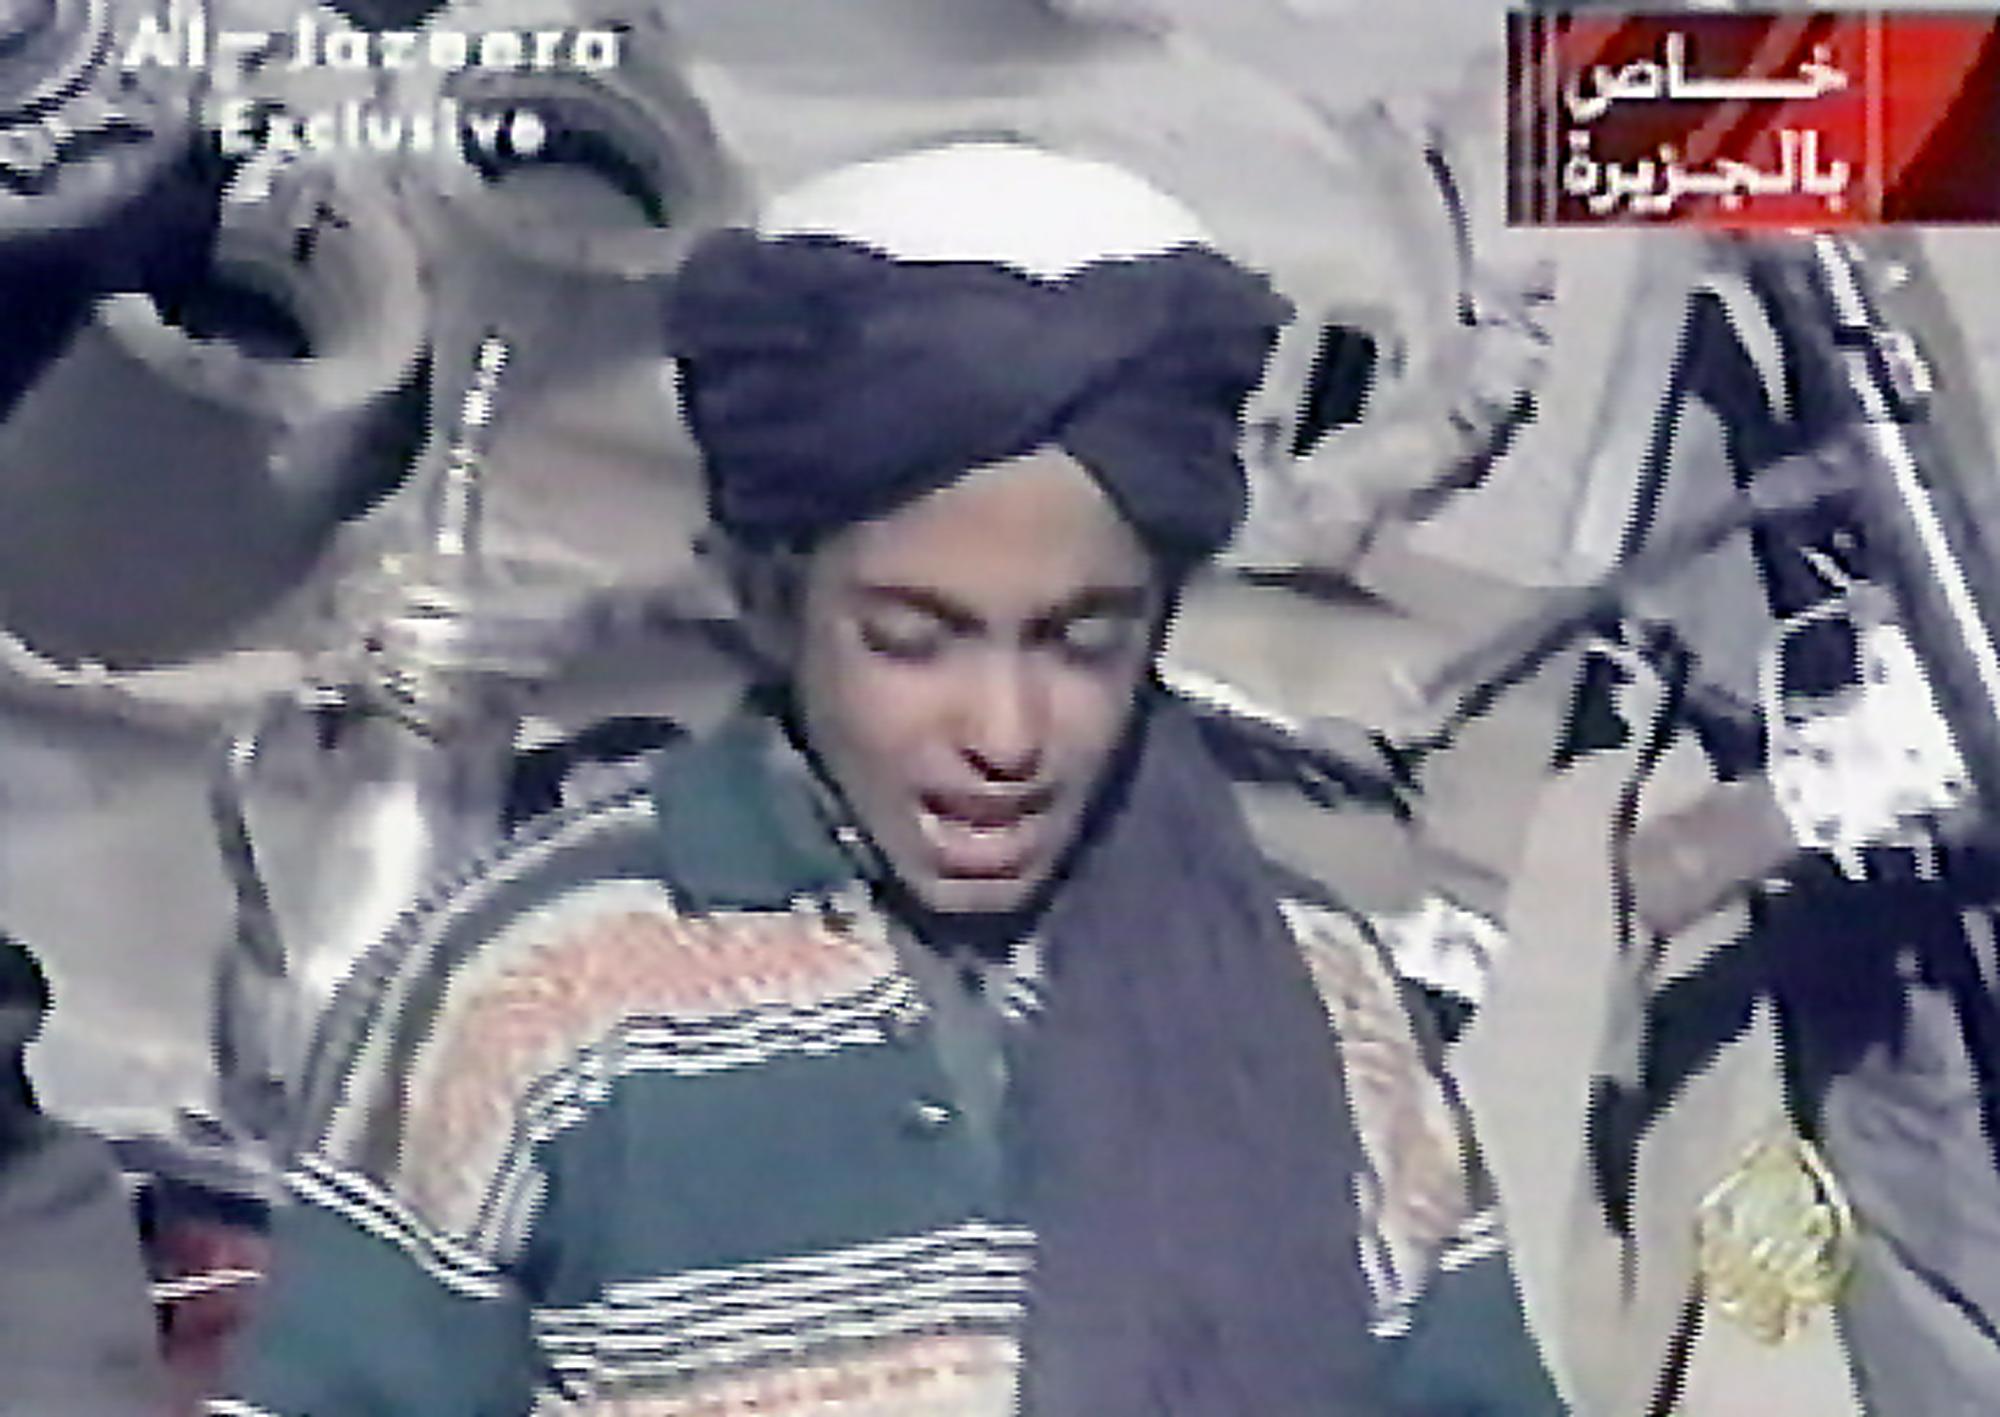 PHOTO: This file frame grab photo taken on, Nov. 7, 2001, shows Hamza, who appears to be the youngest son of  Saudi born Osama bin Laden, as he recites a poem, in this frame grab taken from the Qatar based al-Jazeera satellite news channel.